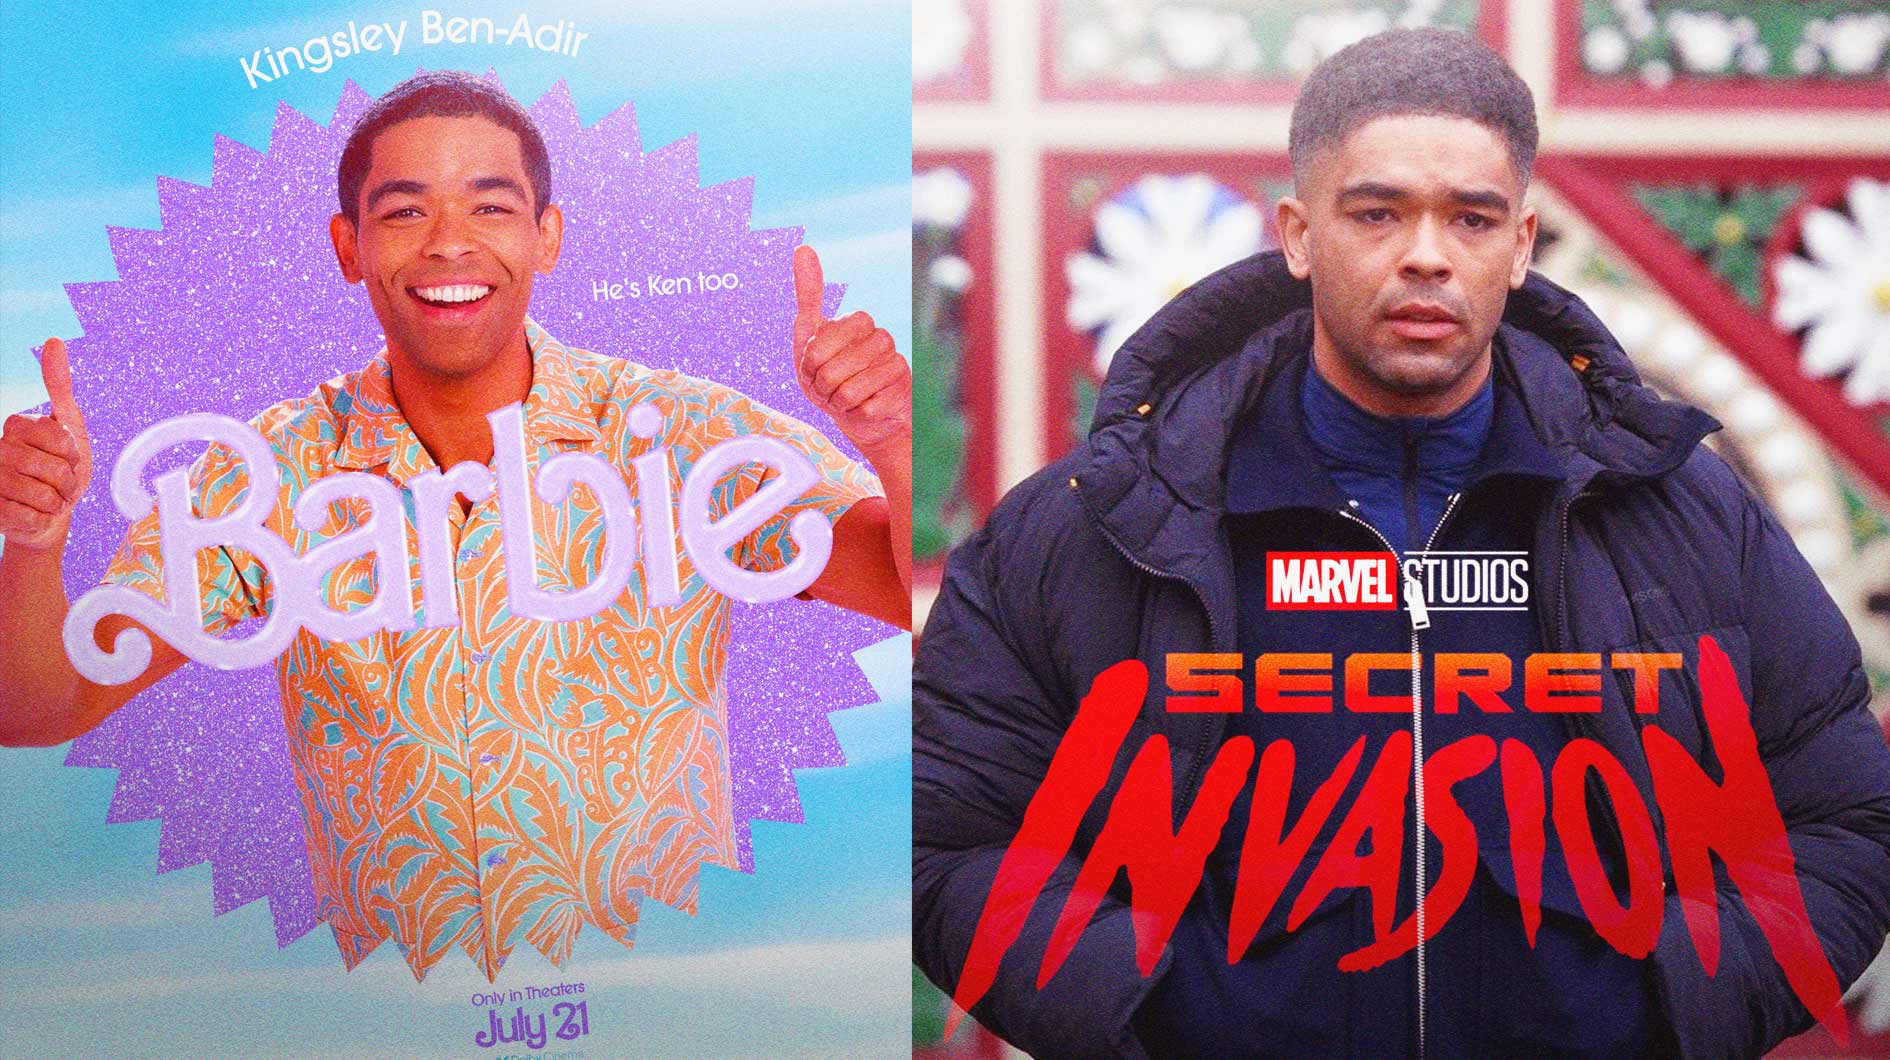 Kingsley Ben-Adir had a role in both Barbie and Secret Invasion.